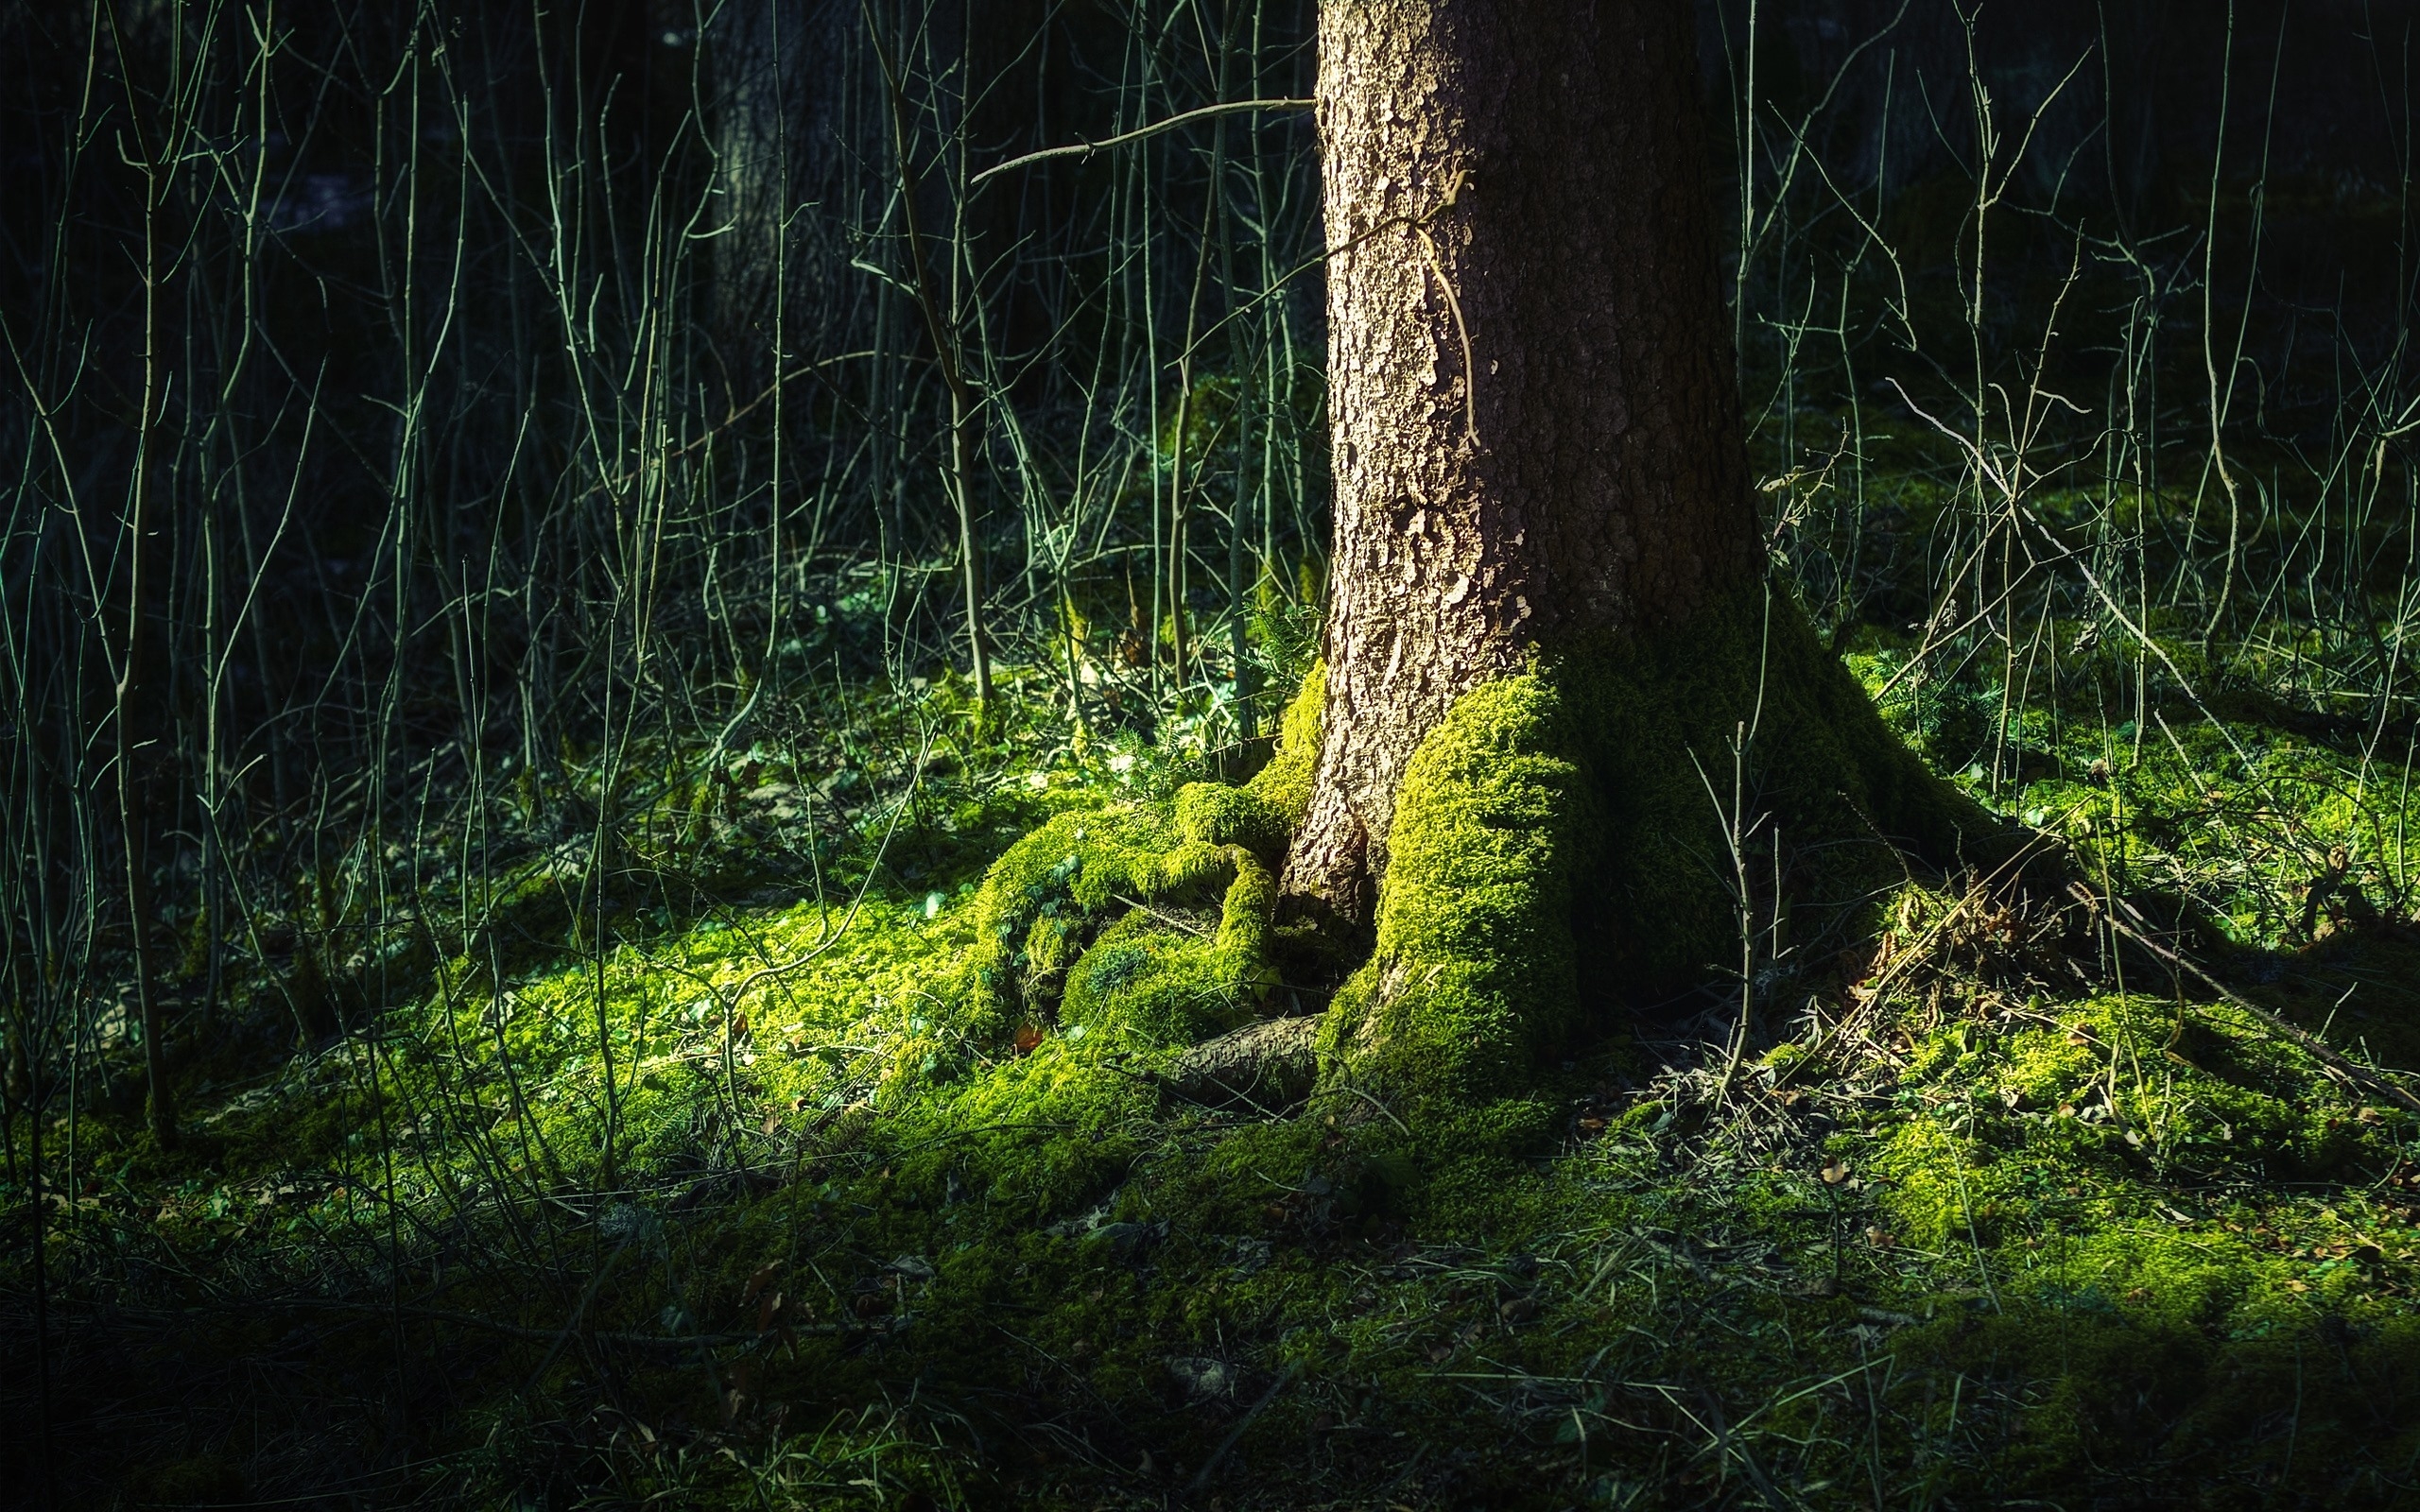 The roots of the tree are covered with green moss